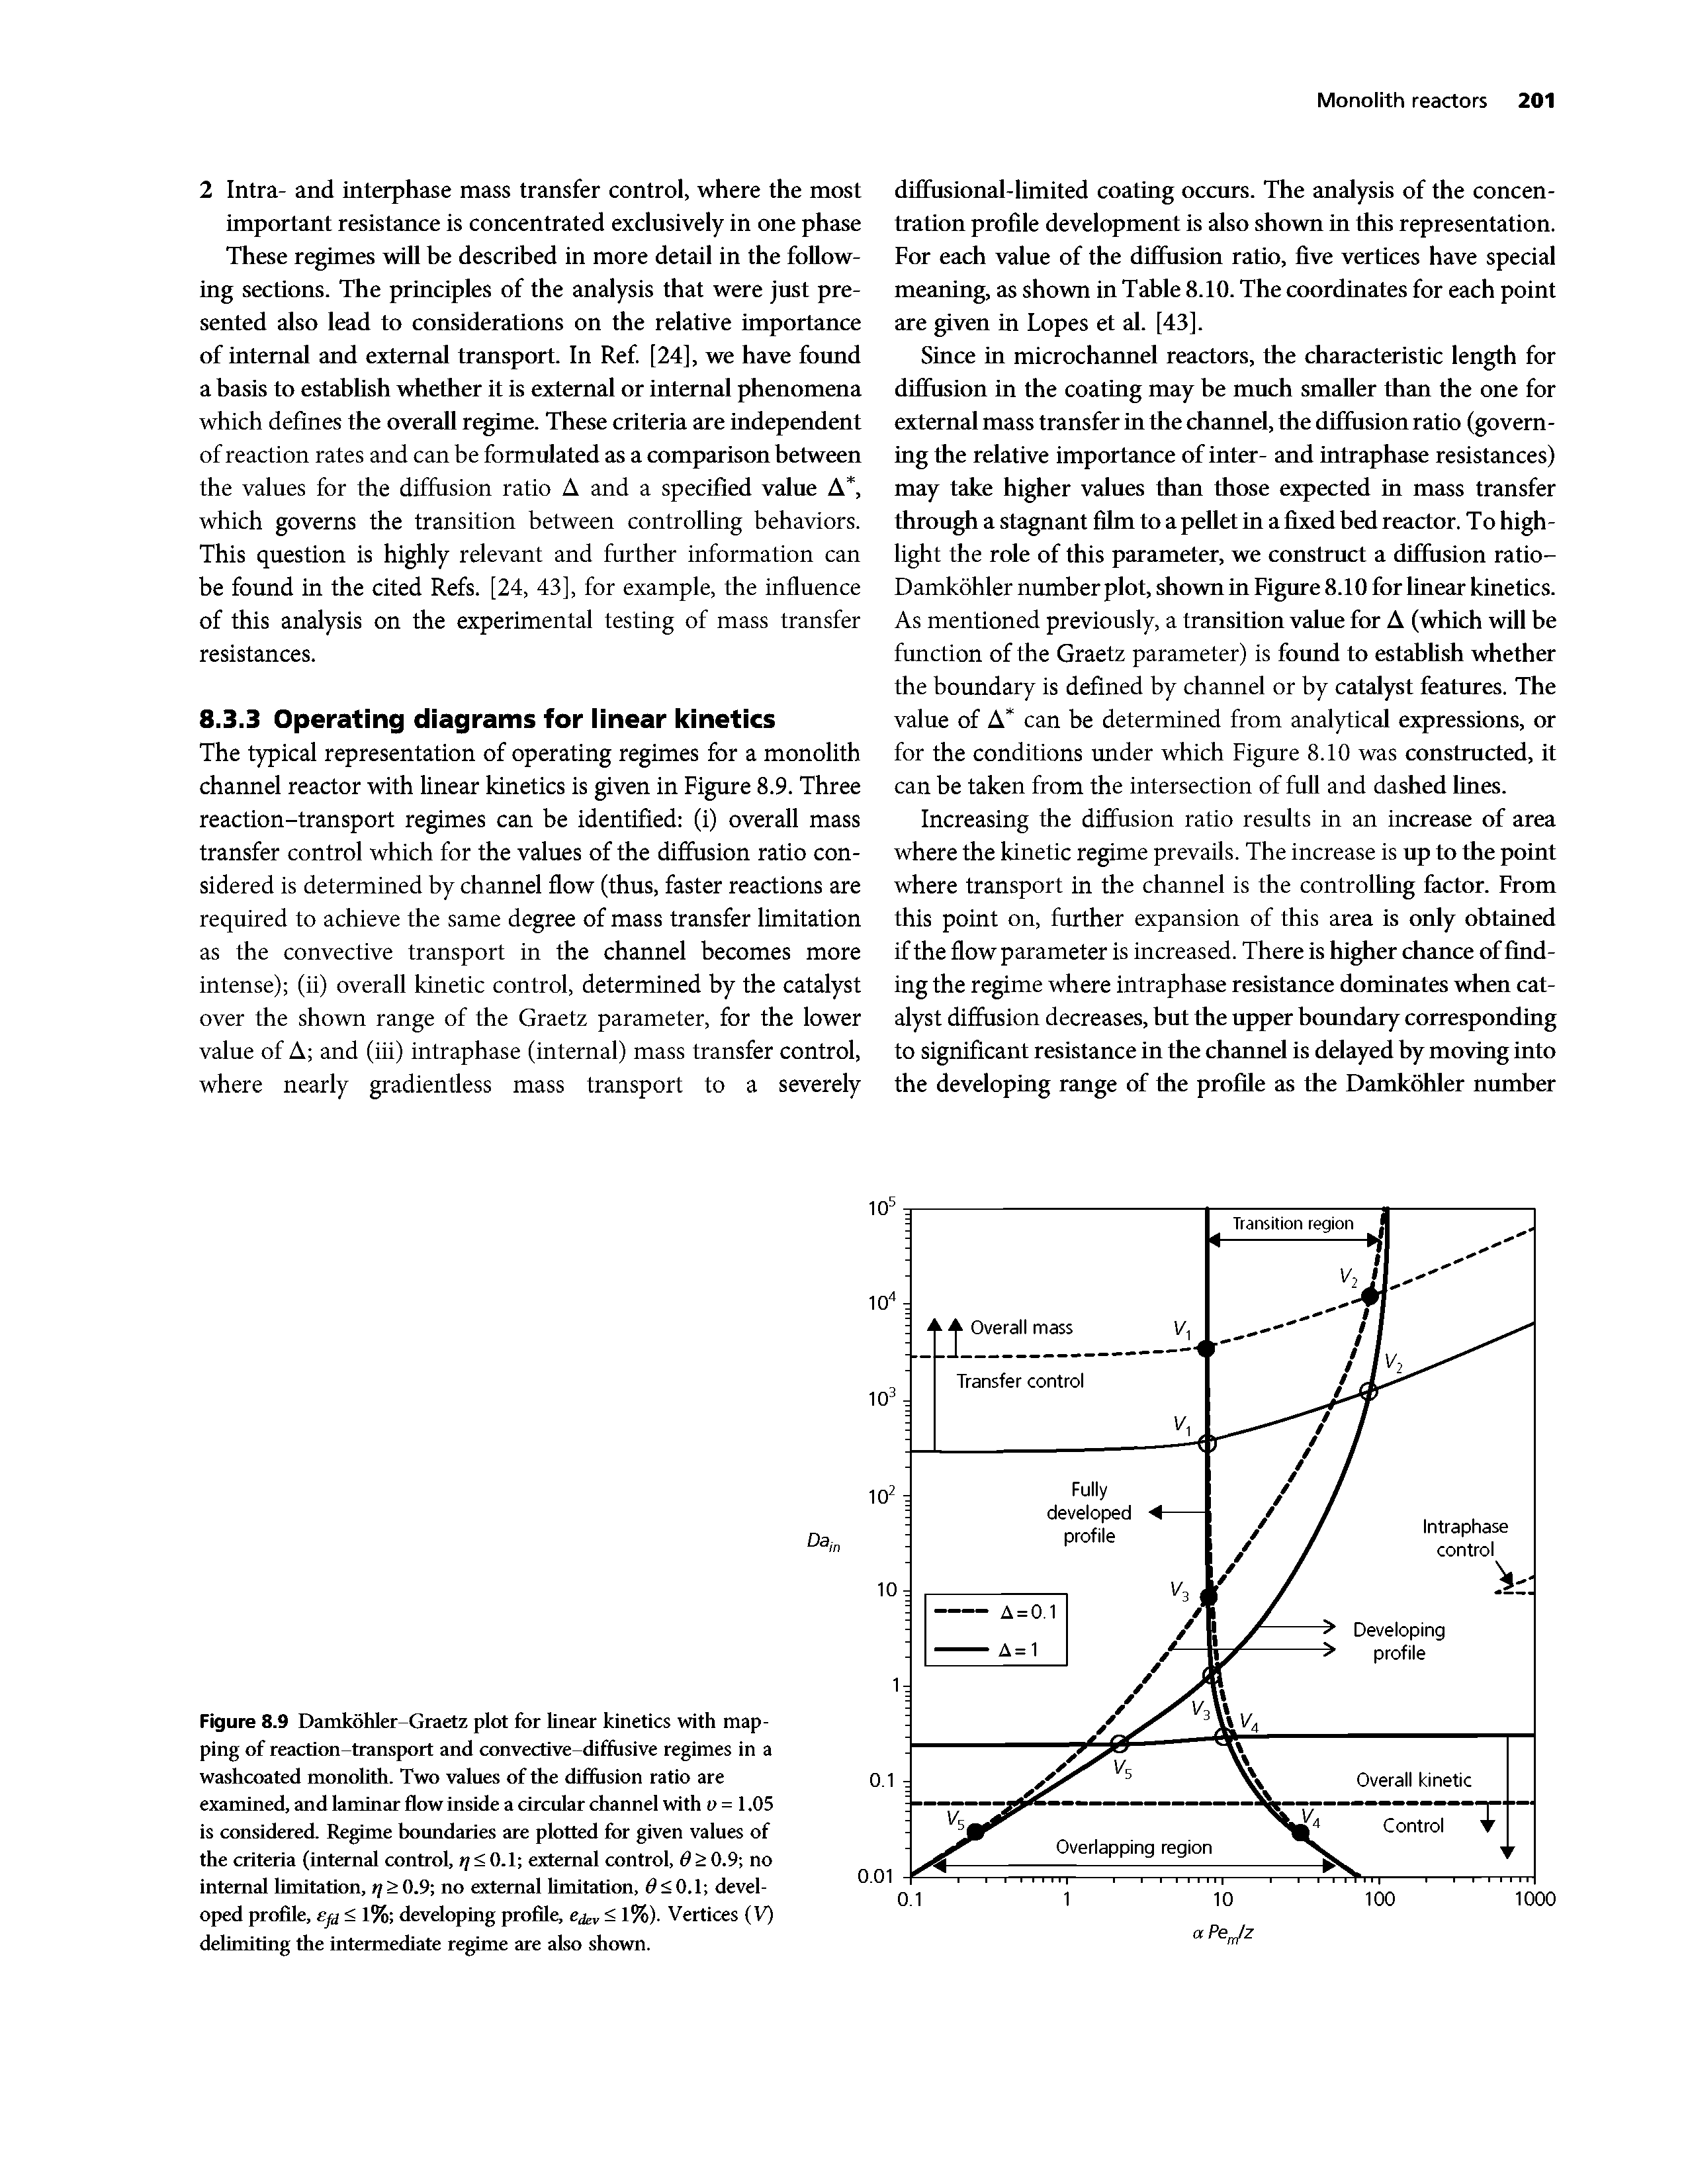 Figure 8.9 Damkohler Graetz plot for linear kinetics with mapping of reaction-transport and convective-diffiisive regimes in a washcoated monolith. Two values of the diffusion ratio are examined, and laminar flow inside a circular channel with y = 1.05 is considered. Regime boundaries are plotted for given values of the criteria (internal control, >/ < 0.1 external control, 6 > 0.9 no internal limitation, rj> 0.9 no external hmitation, 0<O.l developed profile, efl < 1% developing profile, e v %) Vertices (V) delimiting the intermediate regime are also shown.